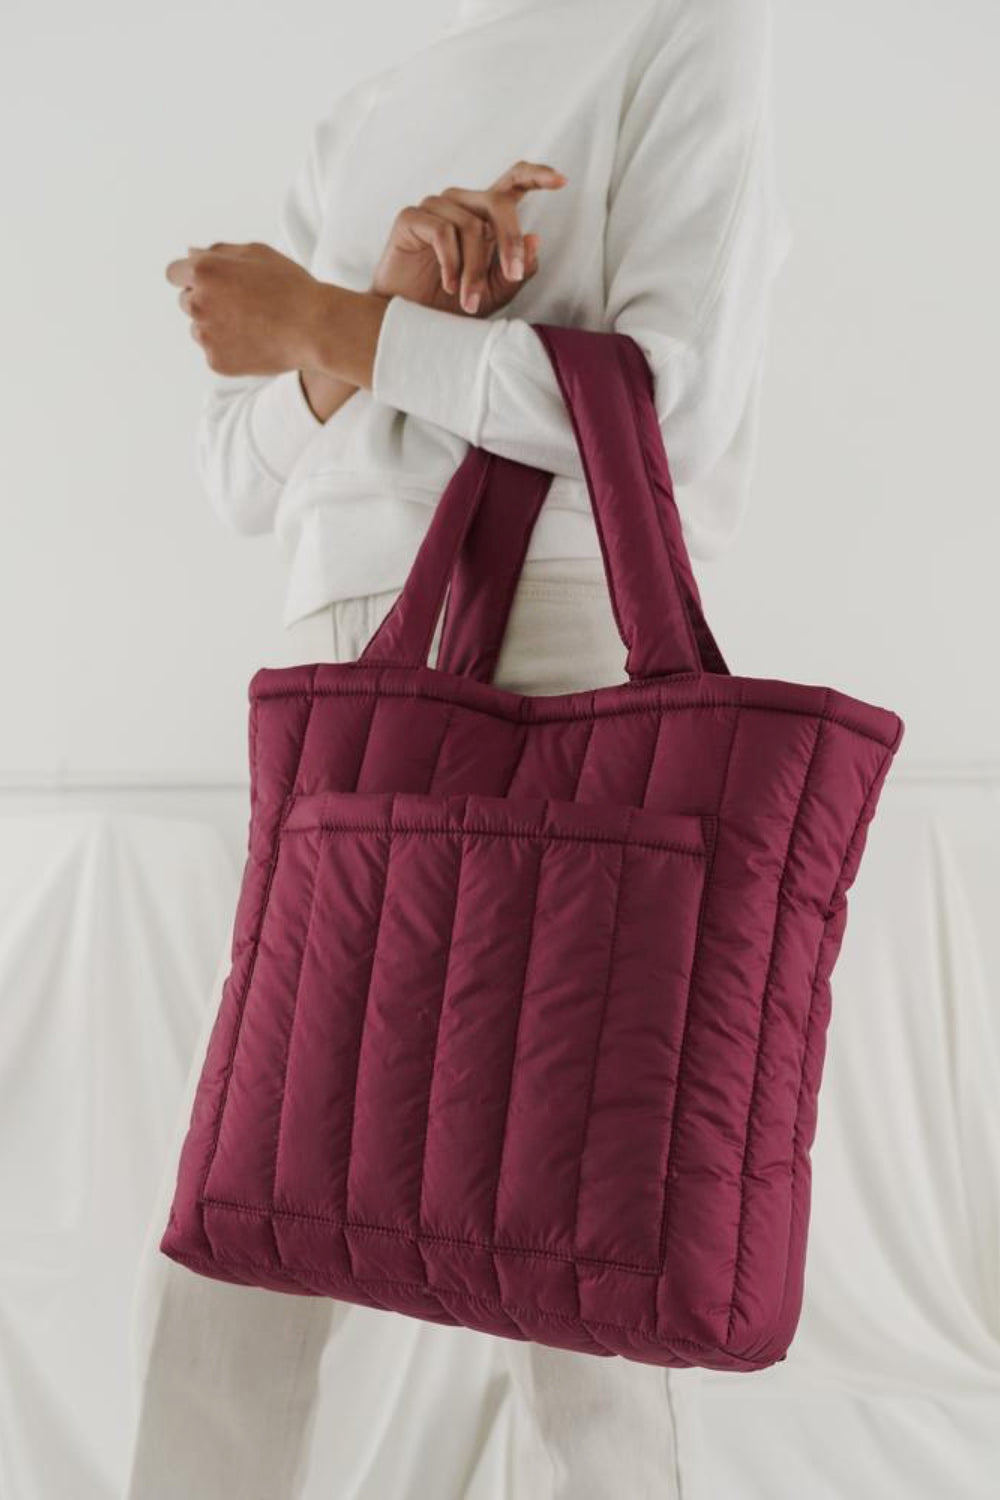 Cranberry Puffy Tote